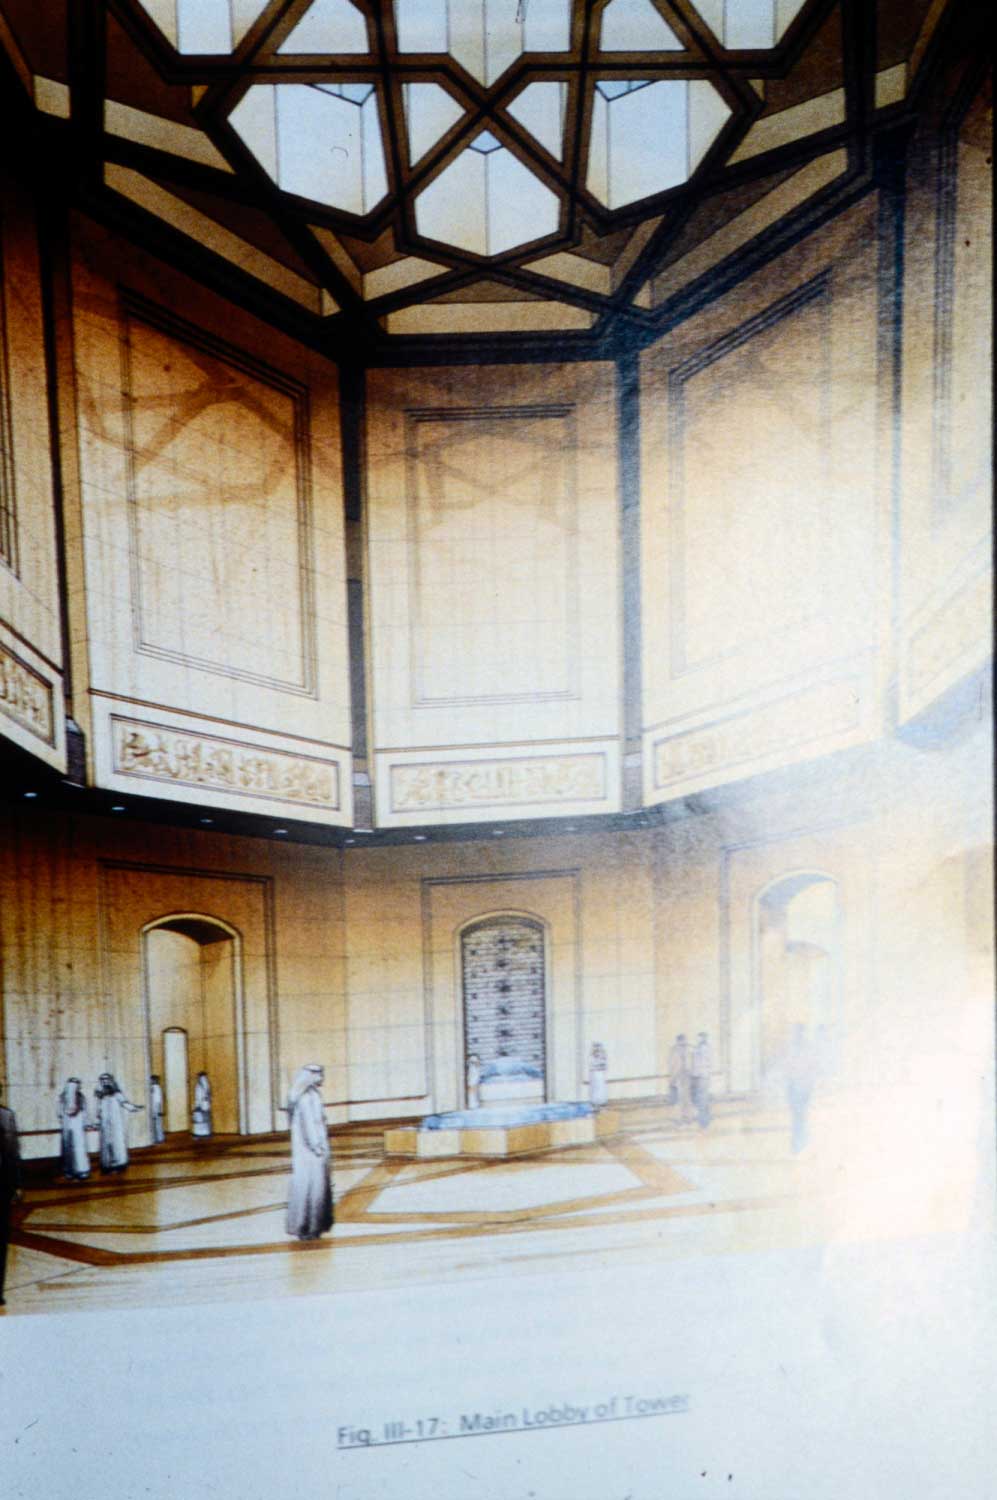 Islamic Bank - Color perspective drawing of tower interior [photograph of a page of a report?]